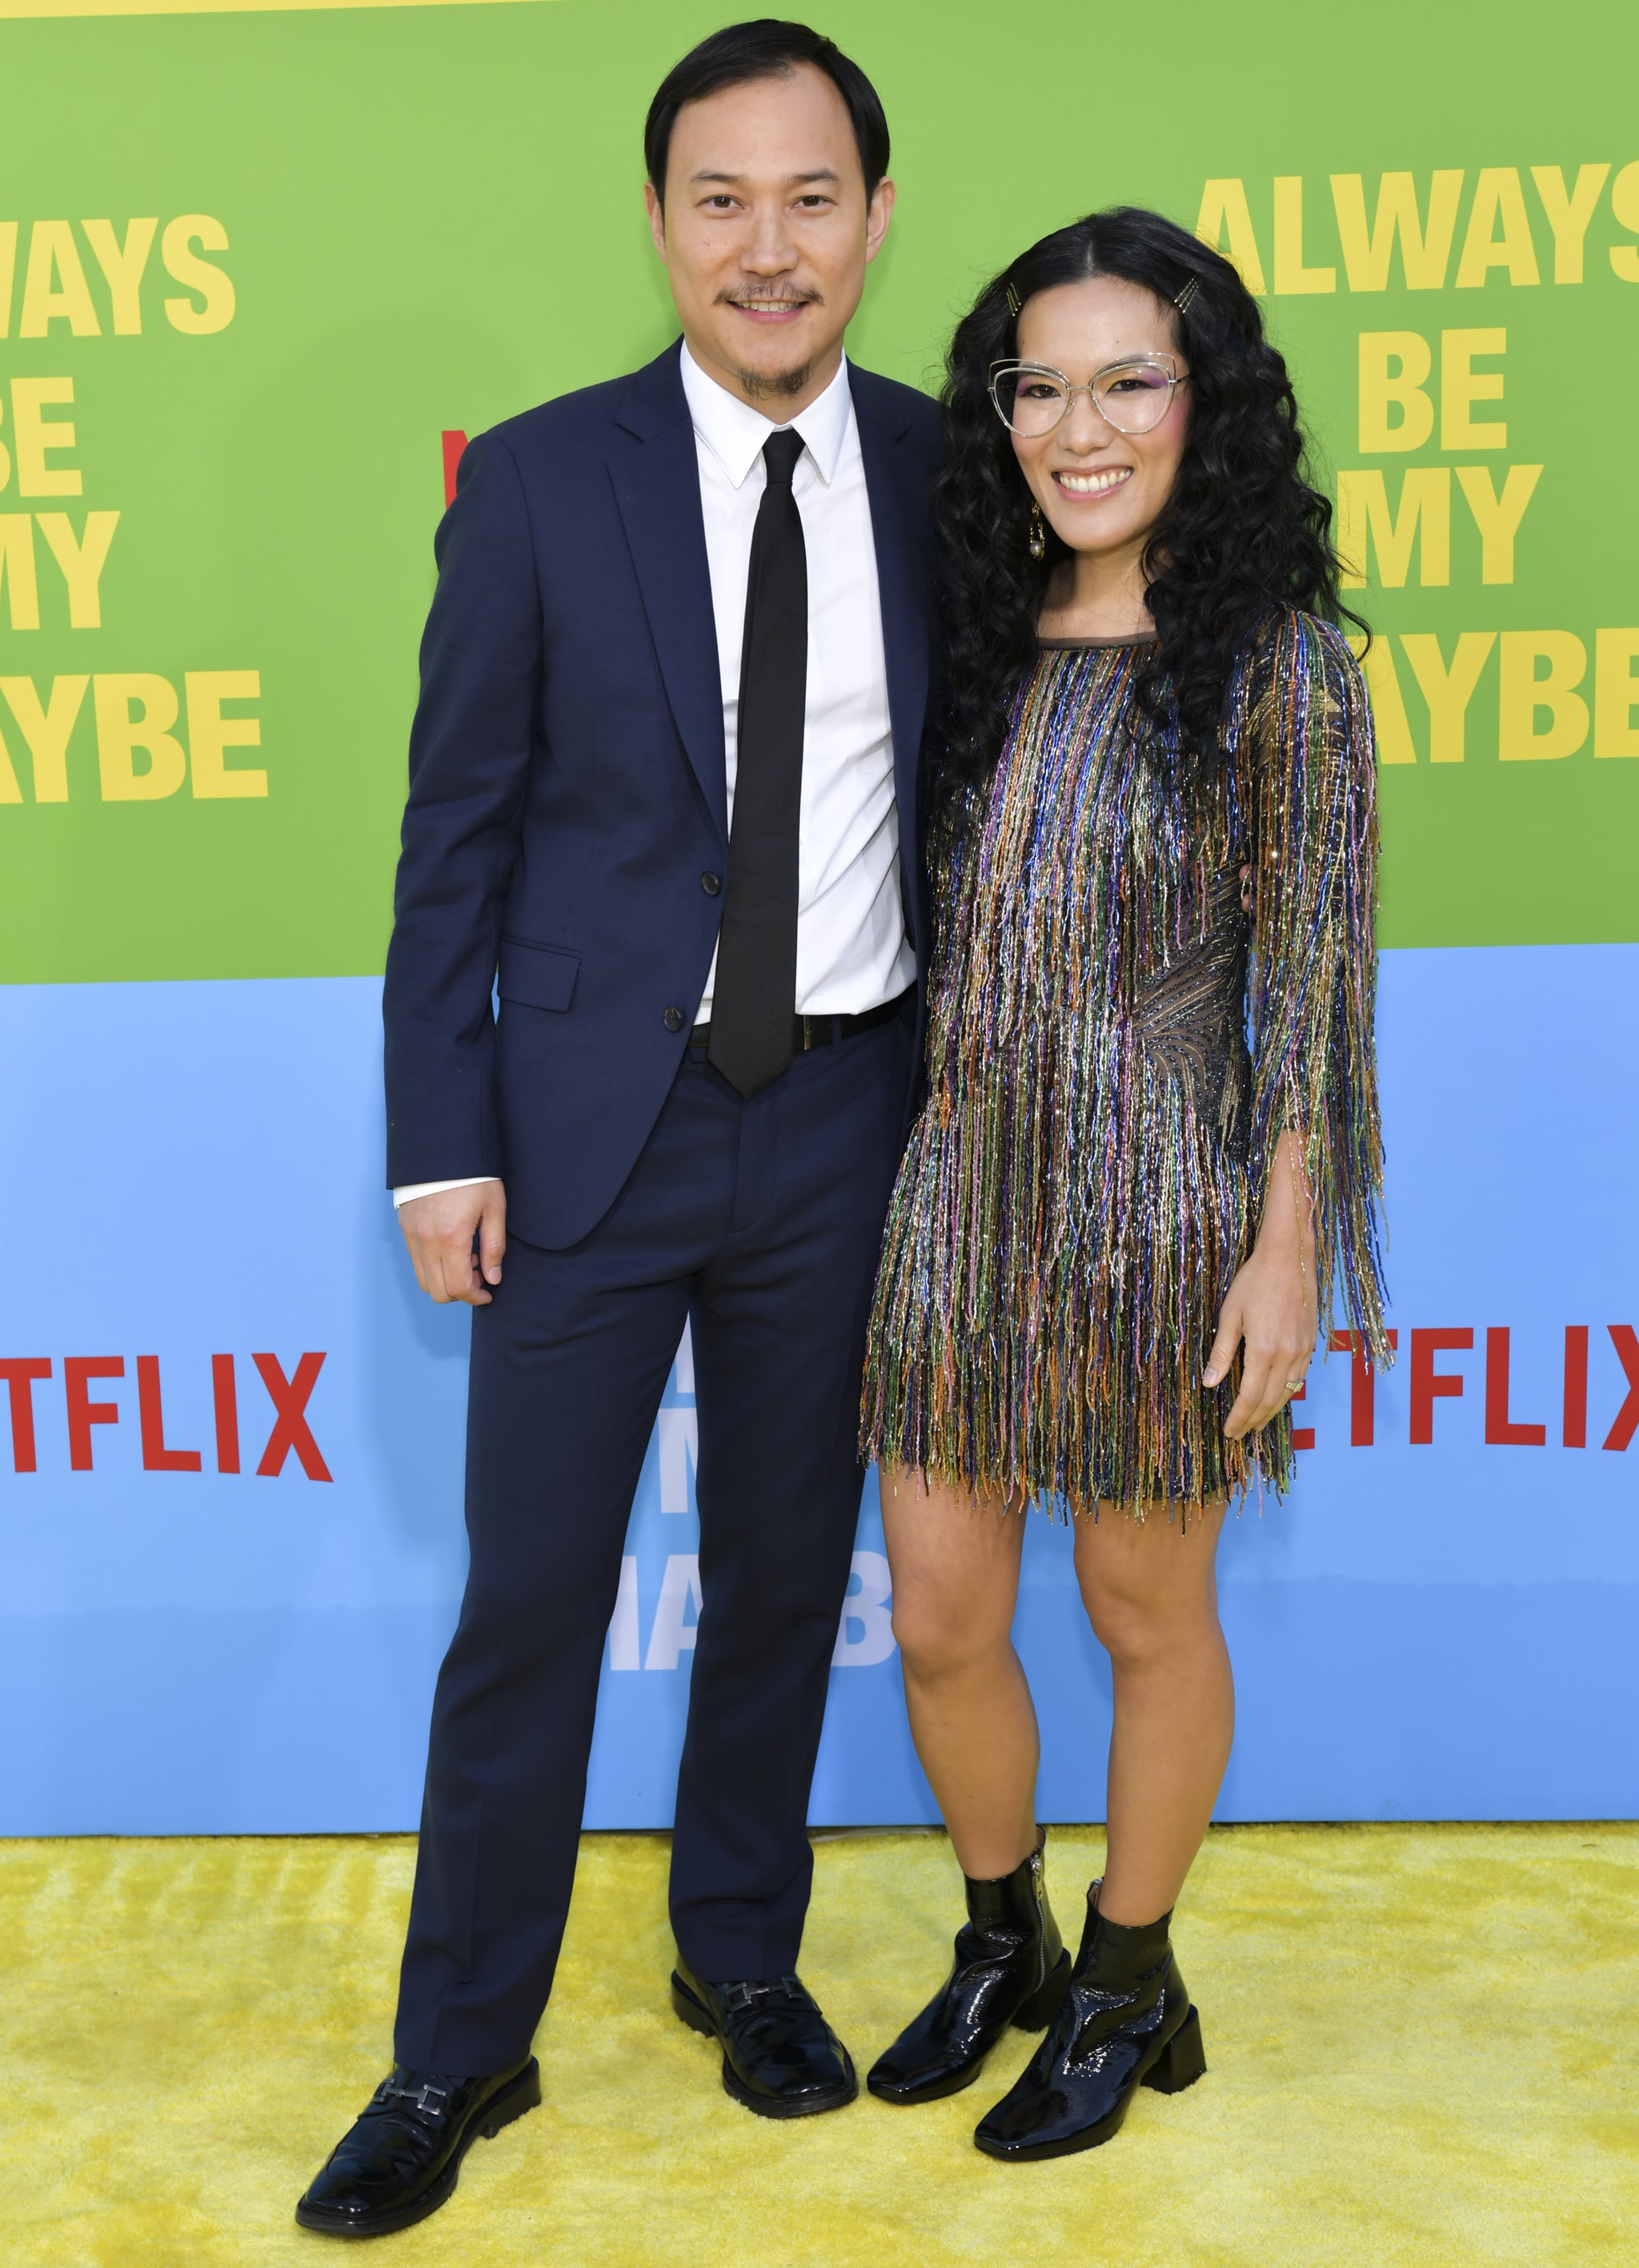 WESTWOOD, CALIFORNIA - MAY 22: Ali Wong (R) and Justin Hakuta attend the premiere of Netflix's 